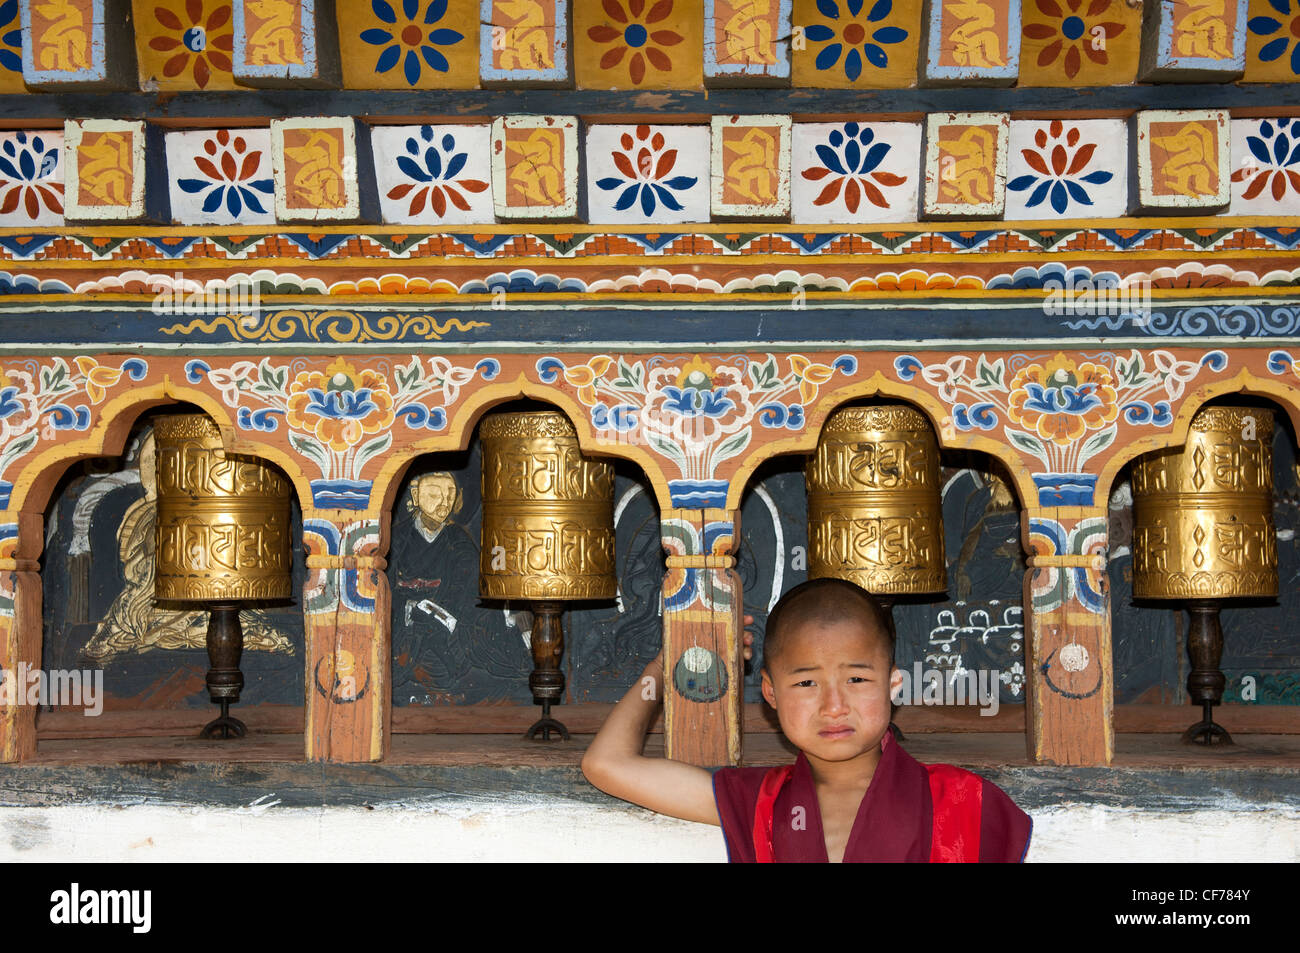 Infantile Buddhist monk standing by the prayer mills in the Temple of Fertility Chimi Lhakhang, Lobesa, Bhutan Stock Photo